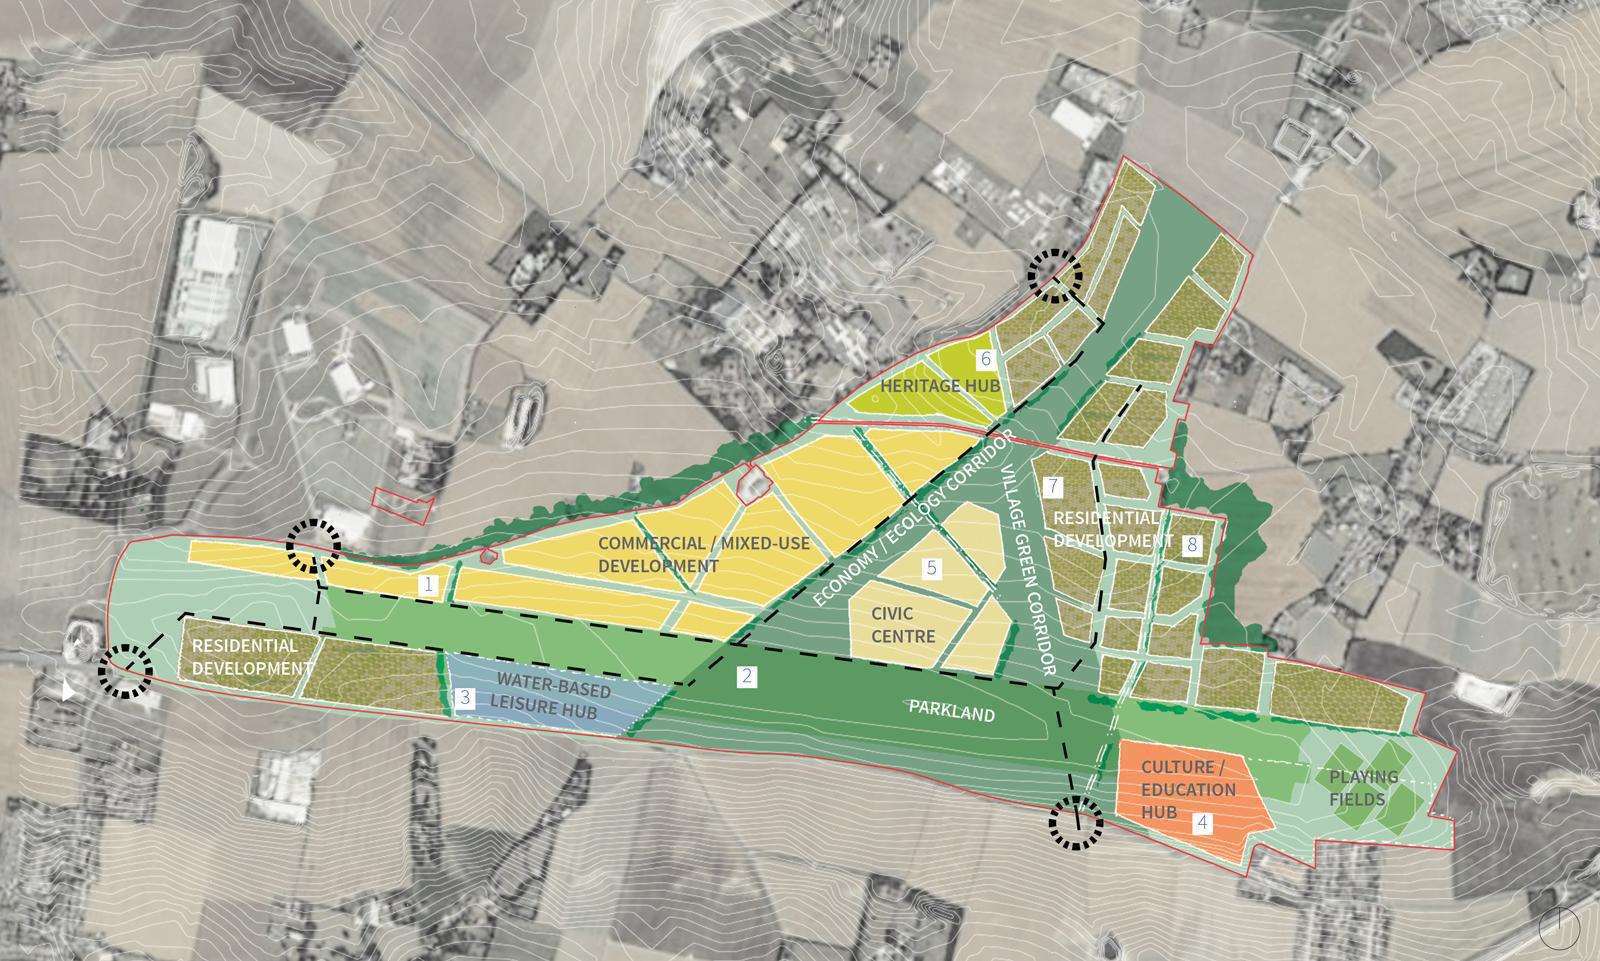 One of the concepts for the former Manston airport site